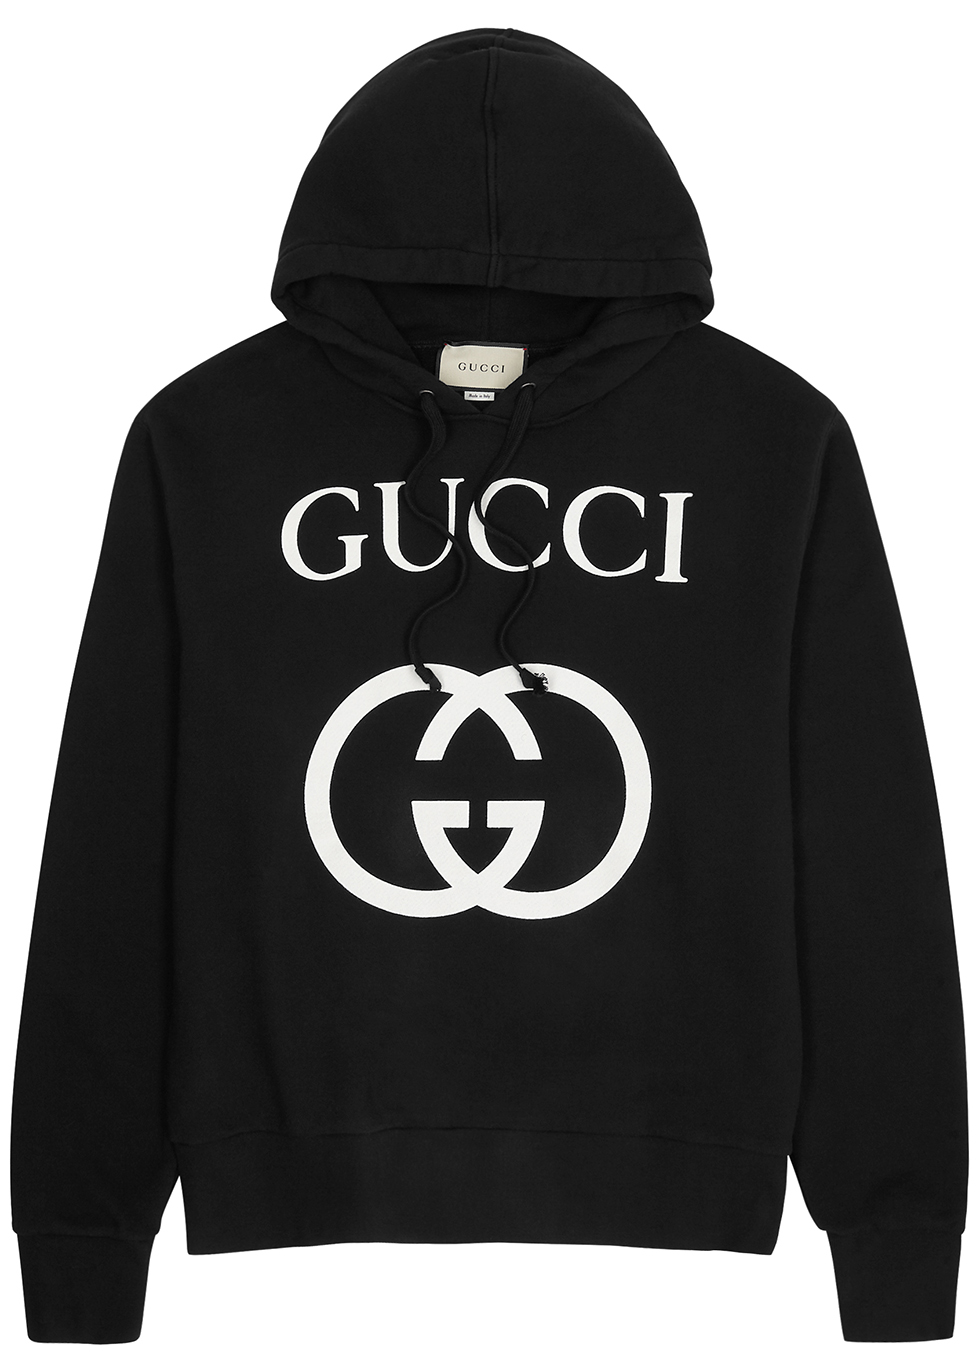 gucci hoodie black and white